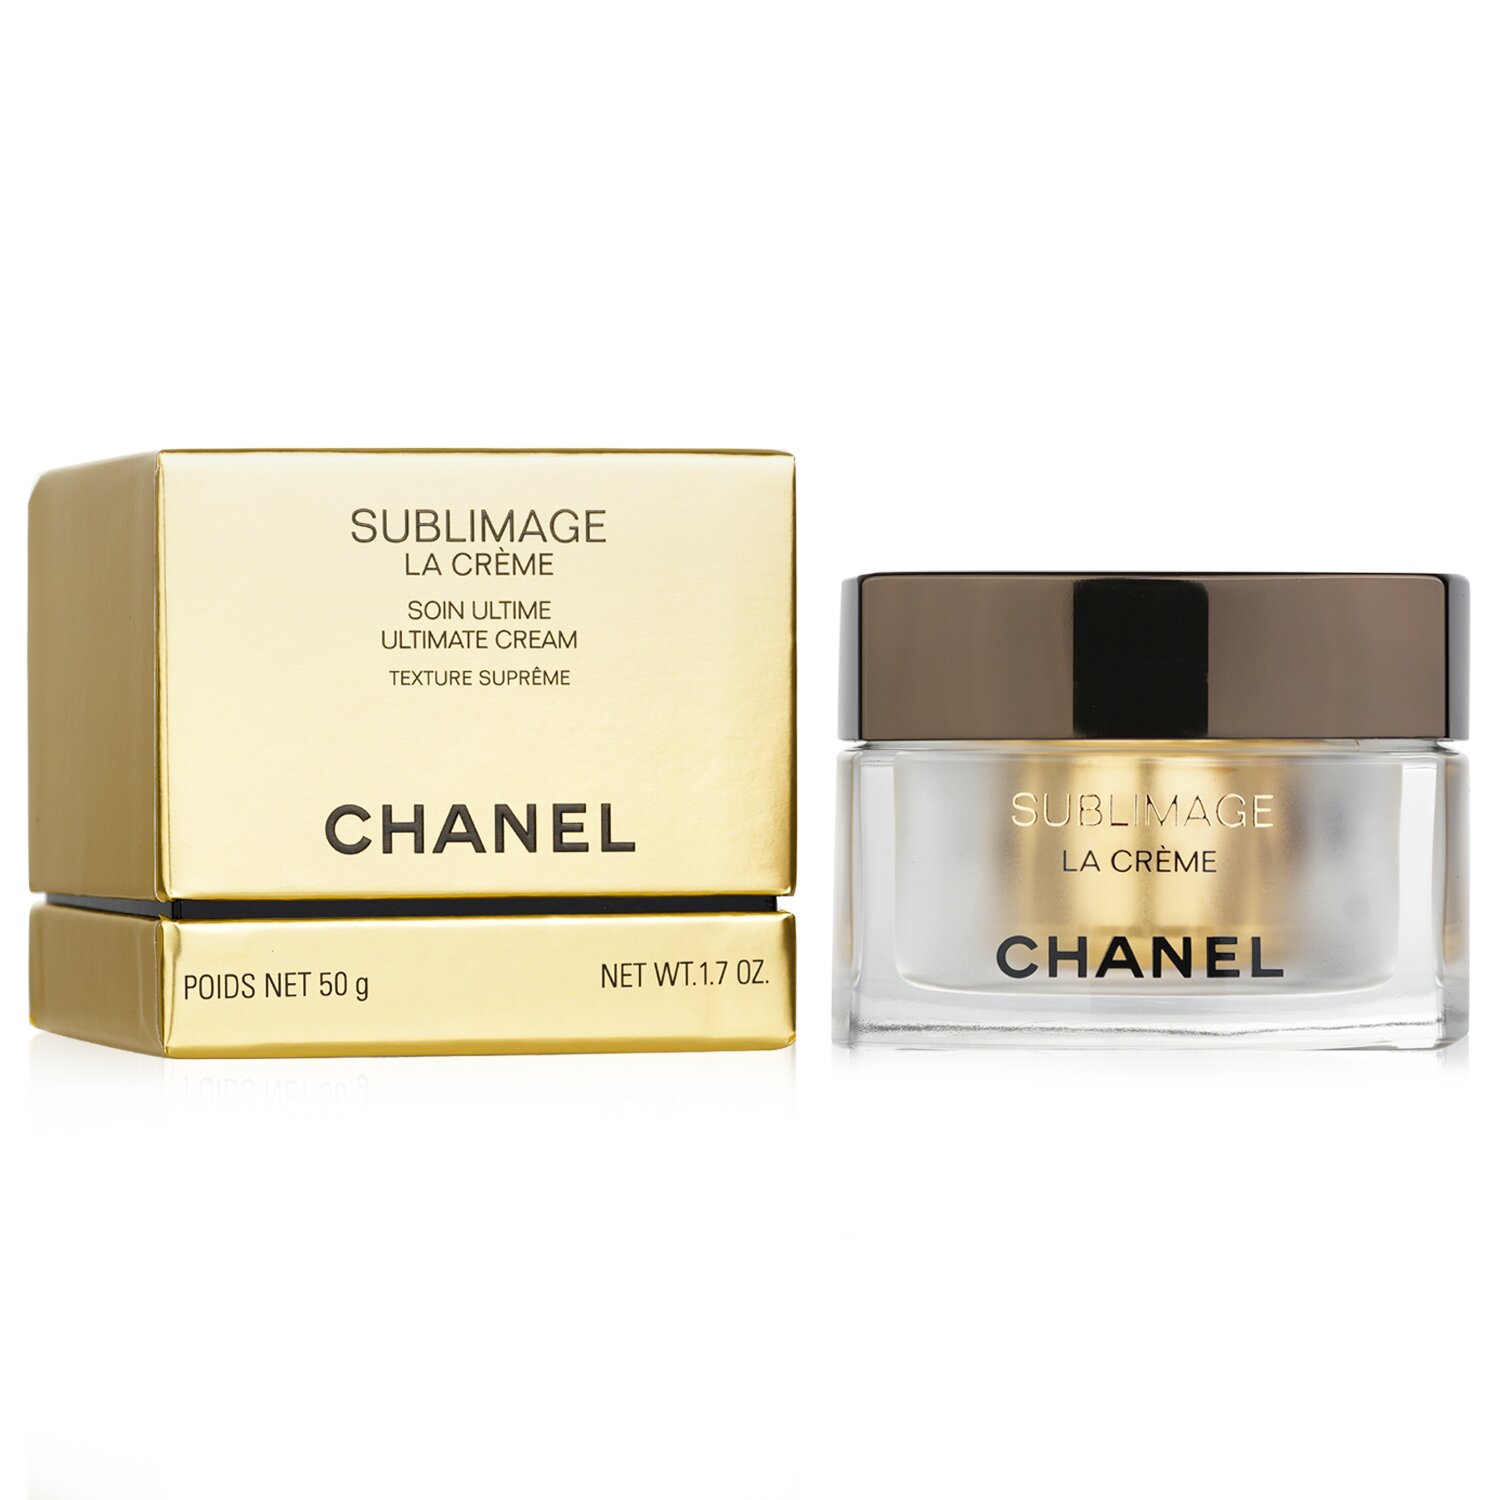 Review: Chanel Sublimage Eye Cream - My Women Stuff